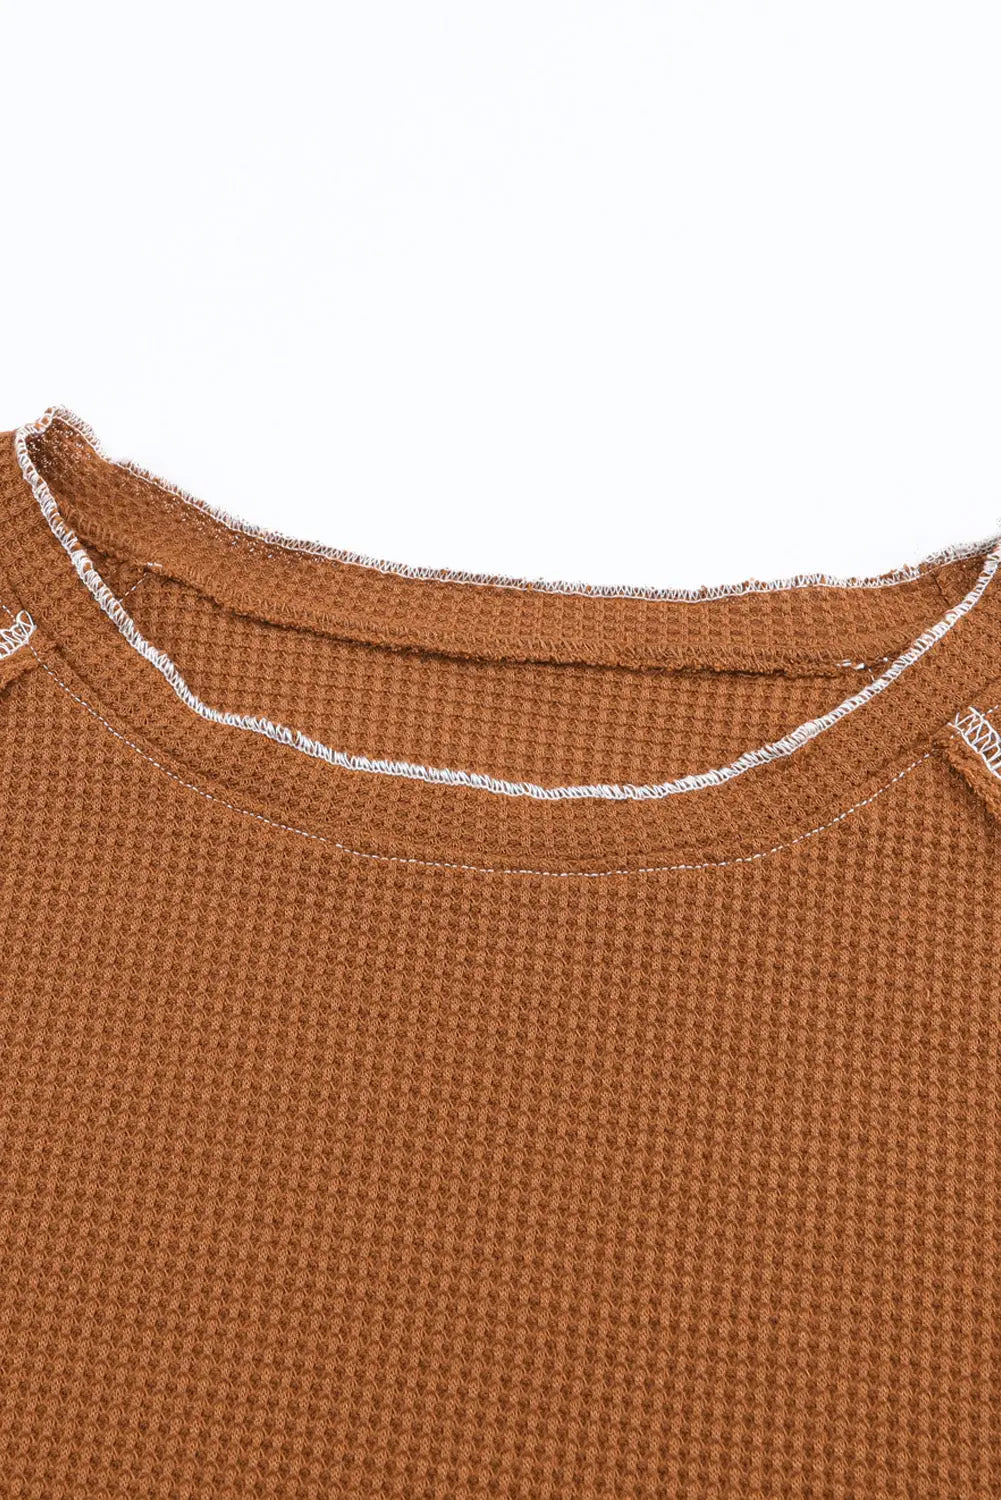 Brown textured round neck long sleeve top - tops